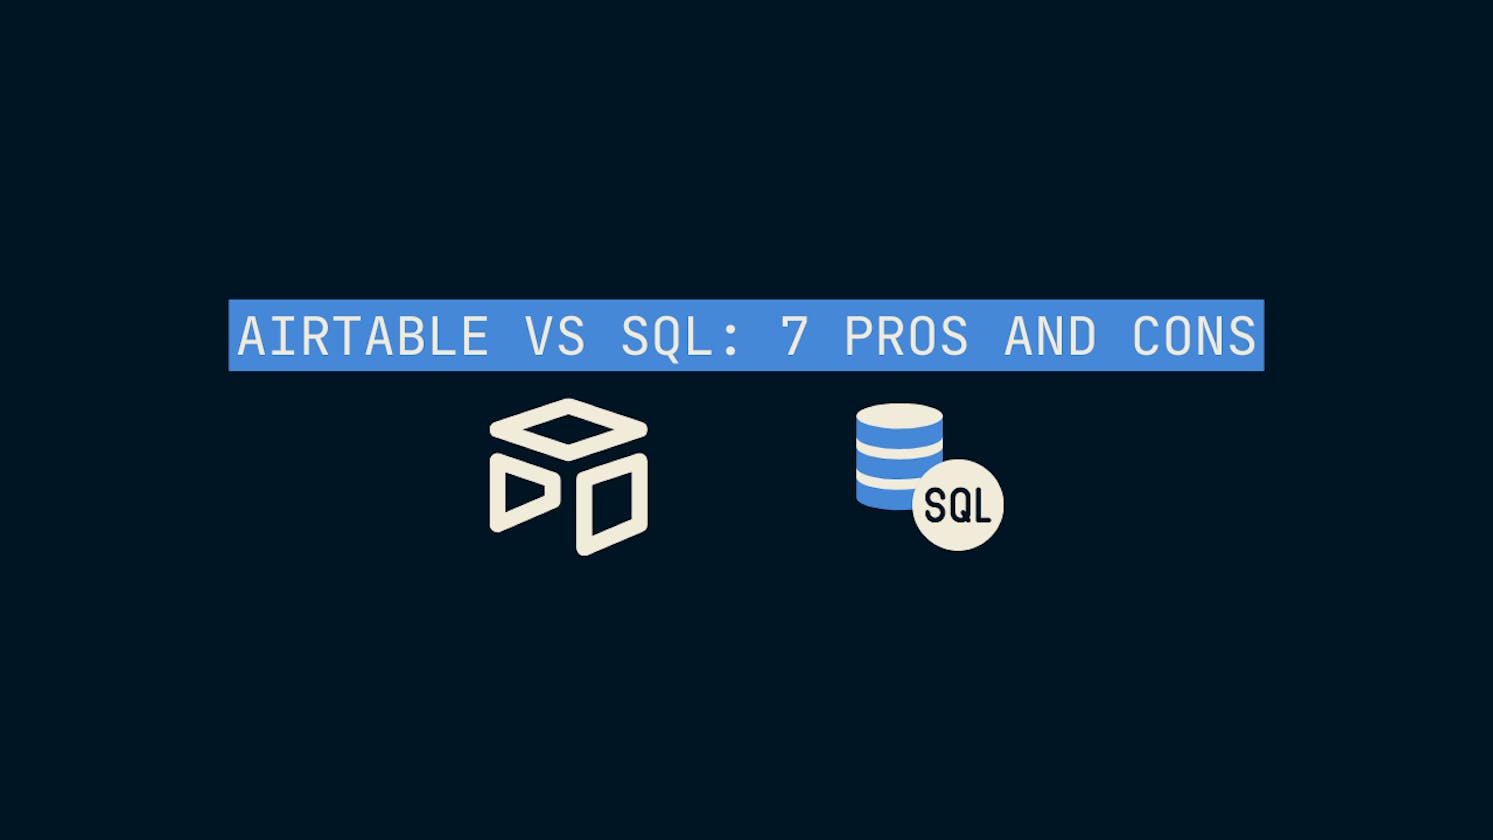 Airtable vs SQL: 7 Pros and Cons of Using Airtable vs a Relational Database